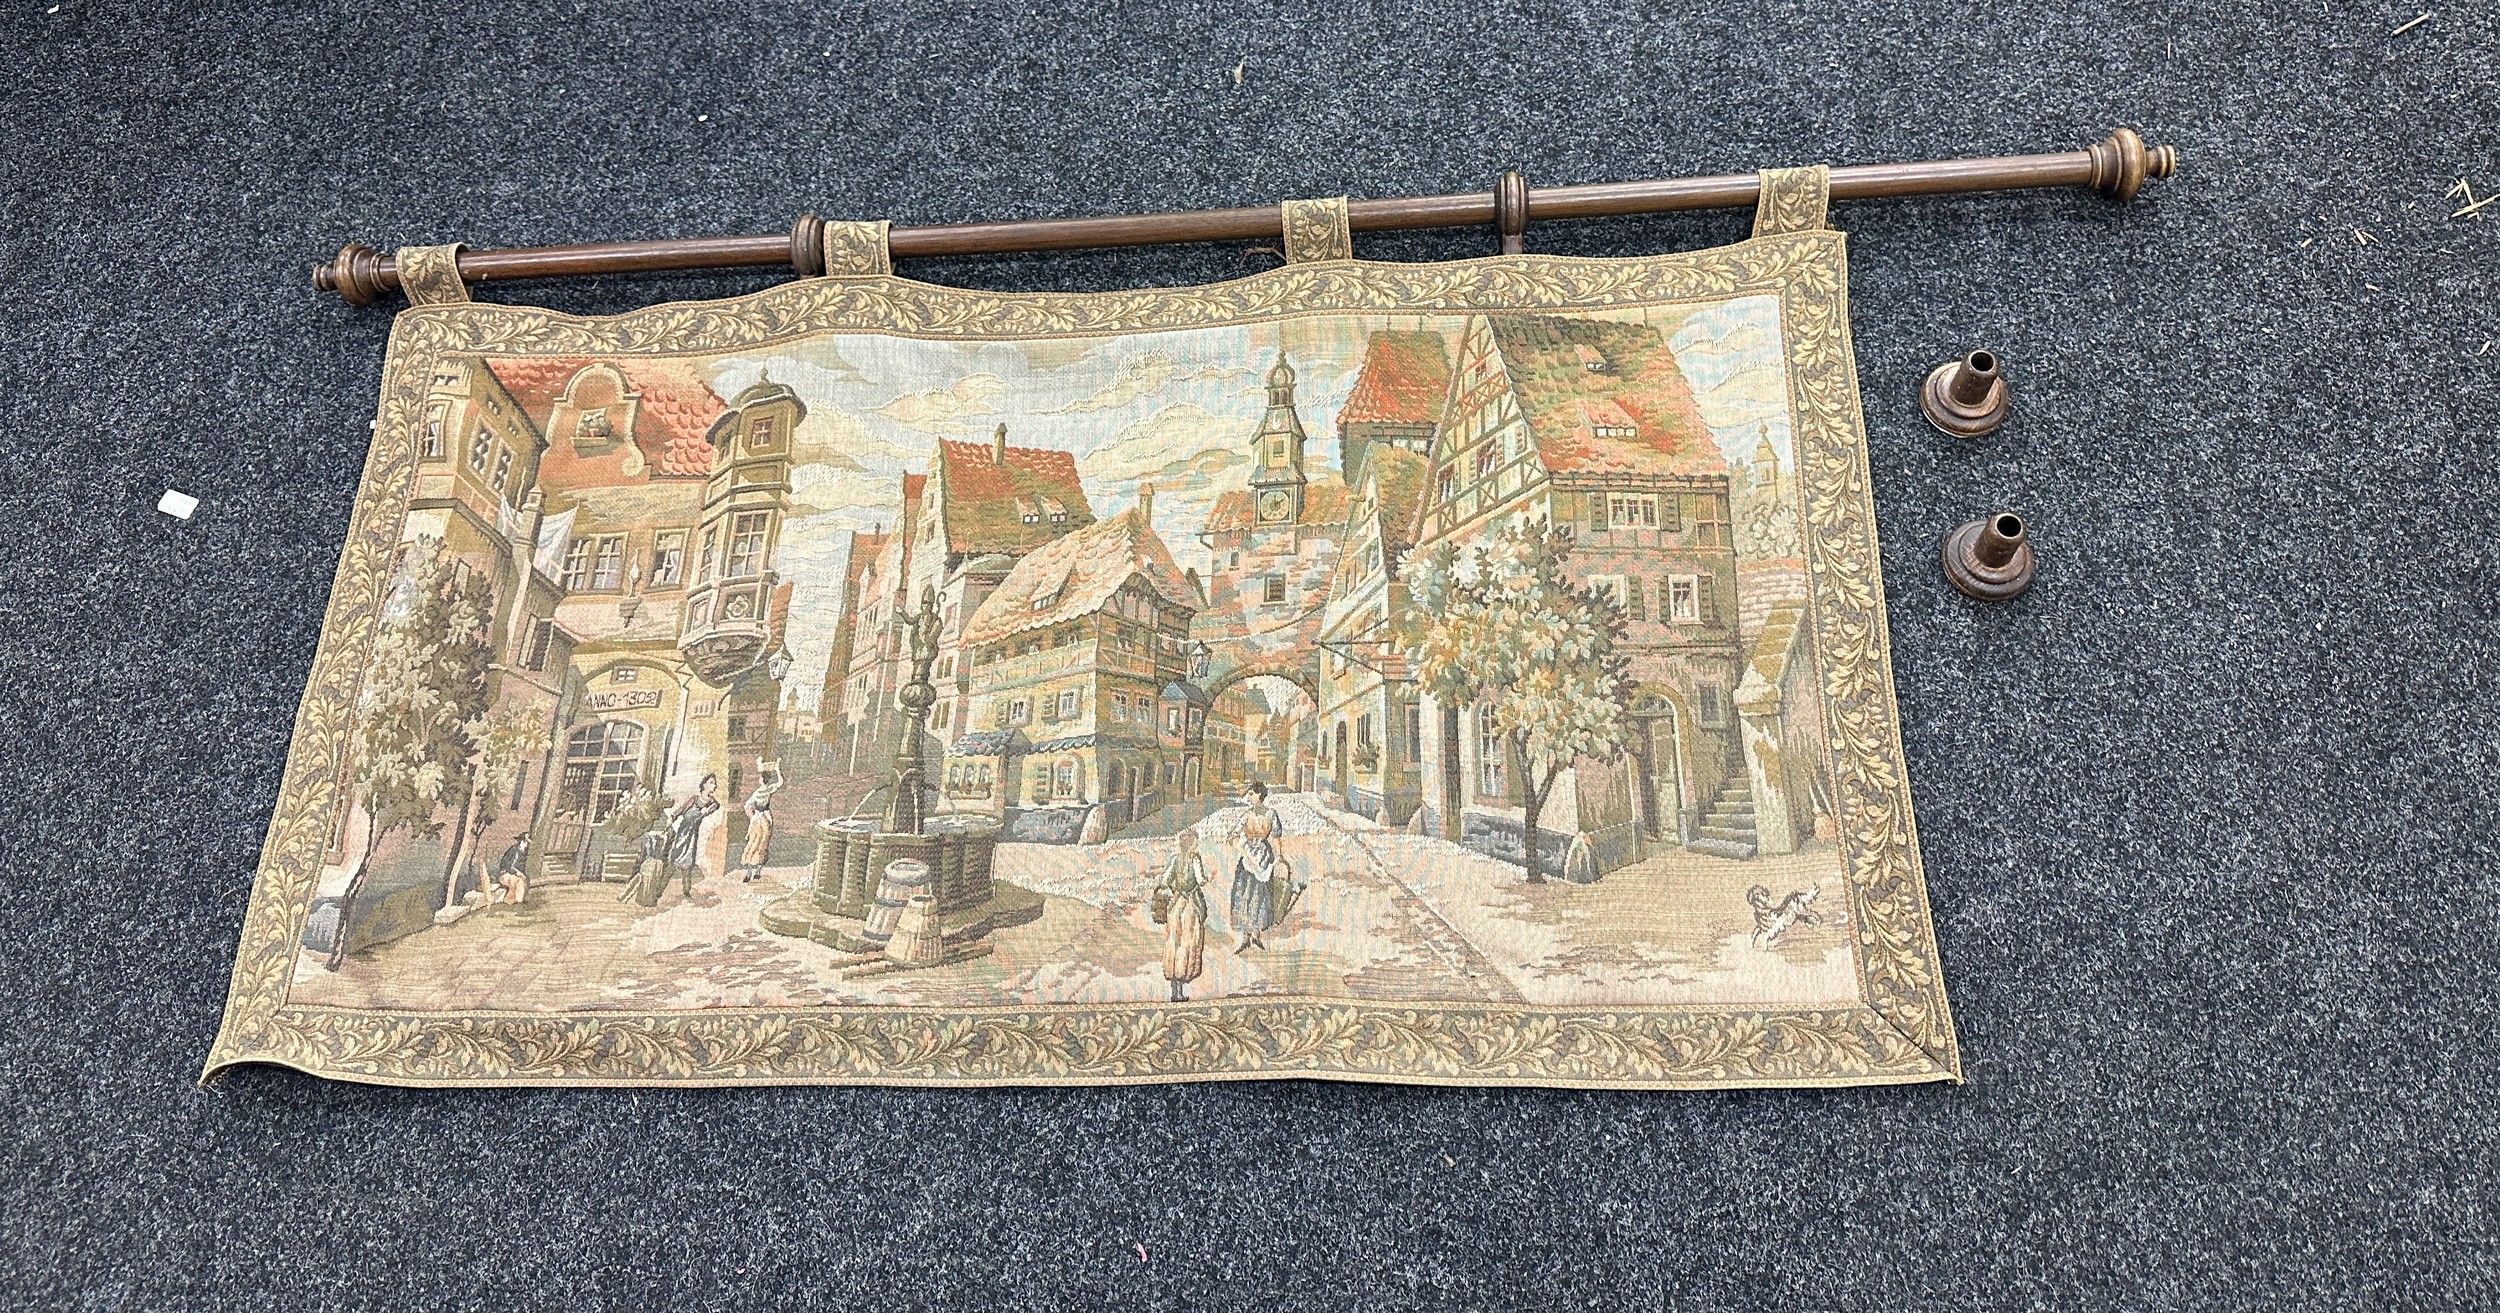 Large wall hanging tapestry measures approximately 67 inches